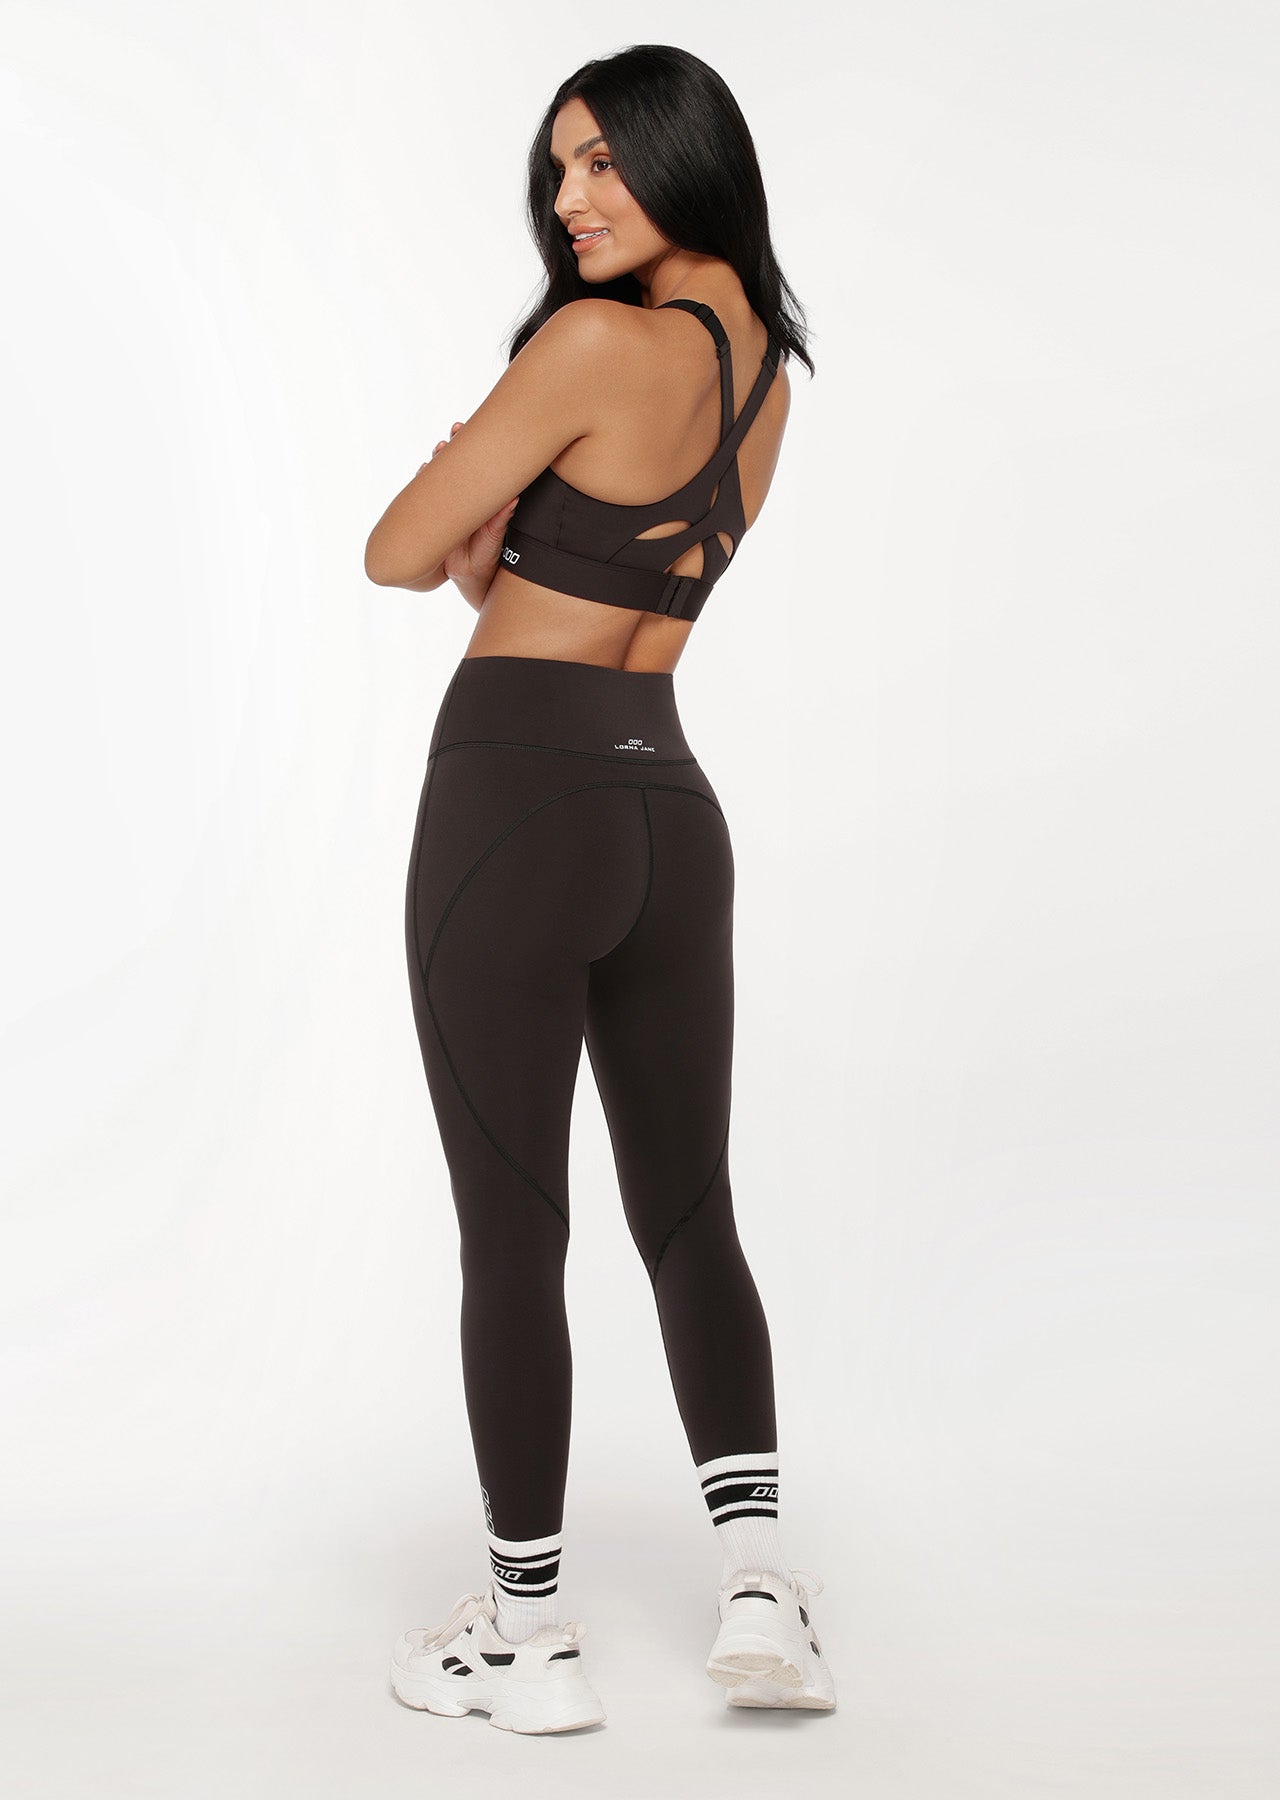 Lorna Jane compression tights, Women's Fashion, Activewear on Carousell